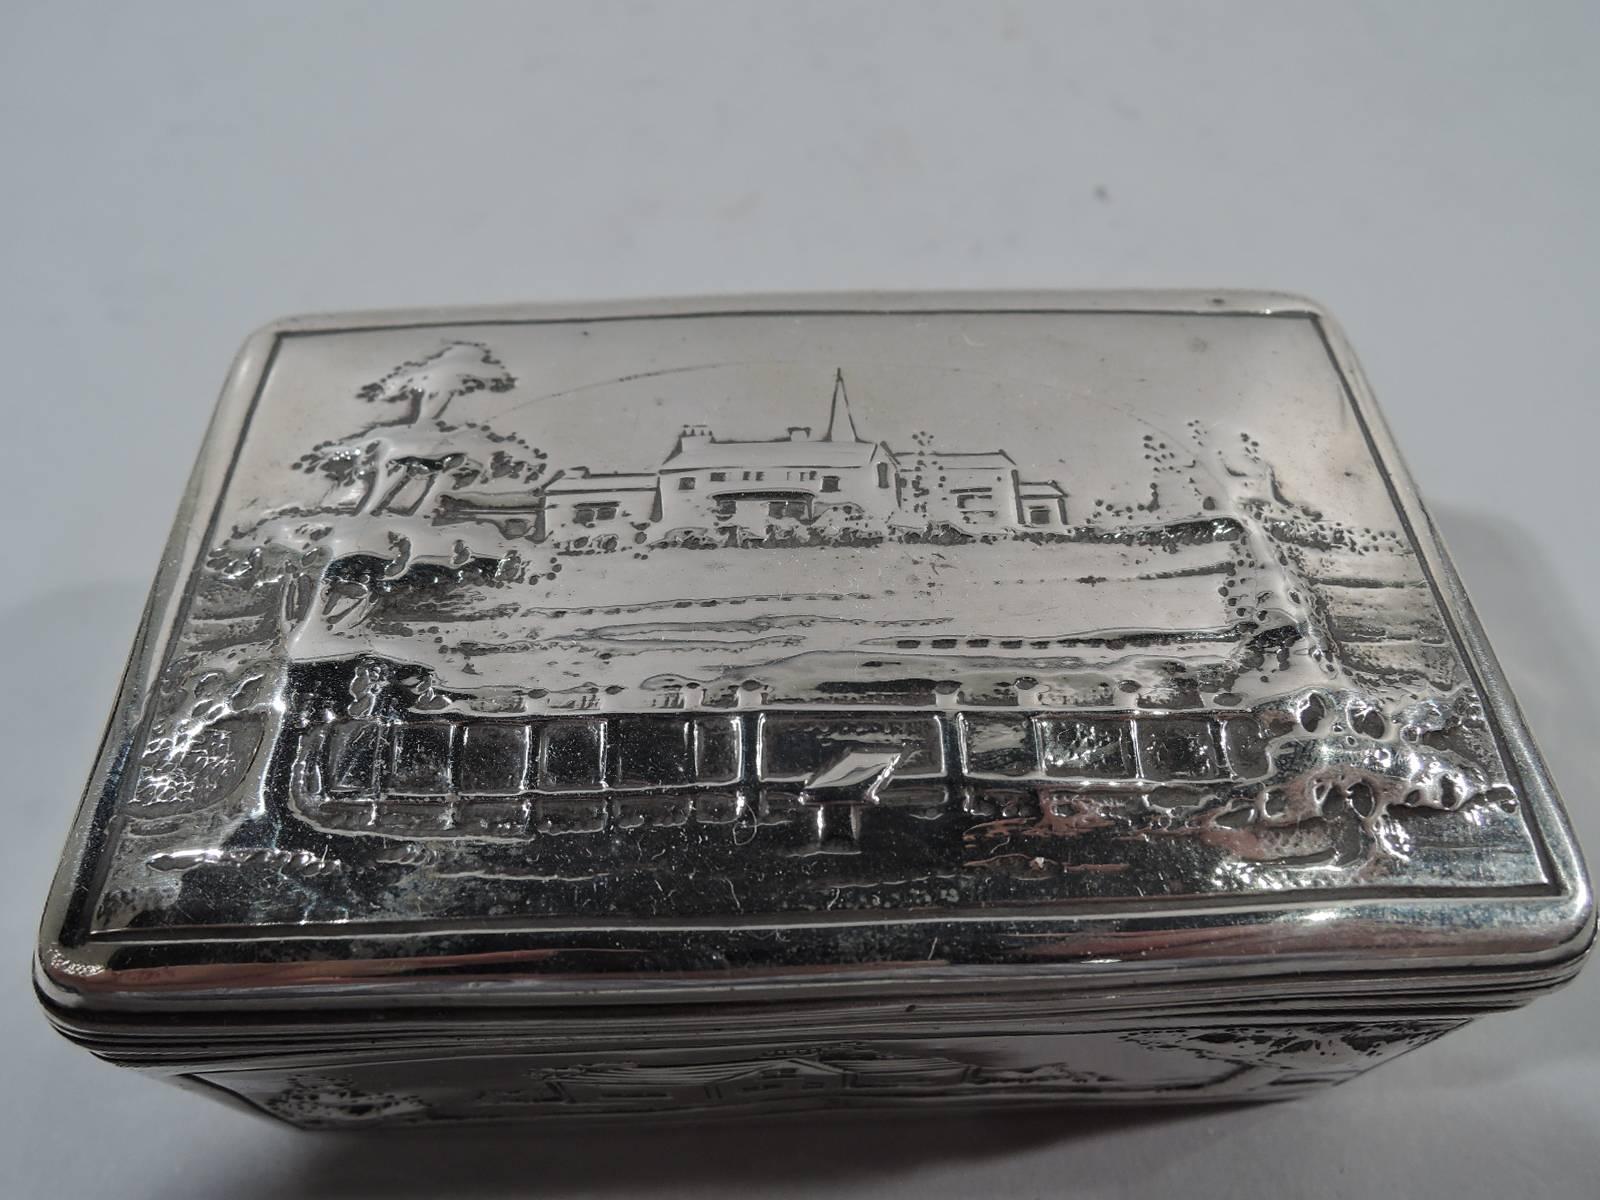 English Georgian sterling silver box with sweet pastoral scenes. Rectangular with reeded and hinged cover. Low-relief landscapes including a steepled church, turreted castle, and bridge. Hallmarked with silver standard, date letter, and George III